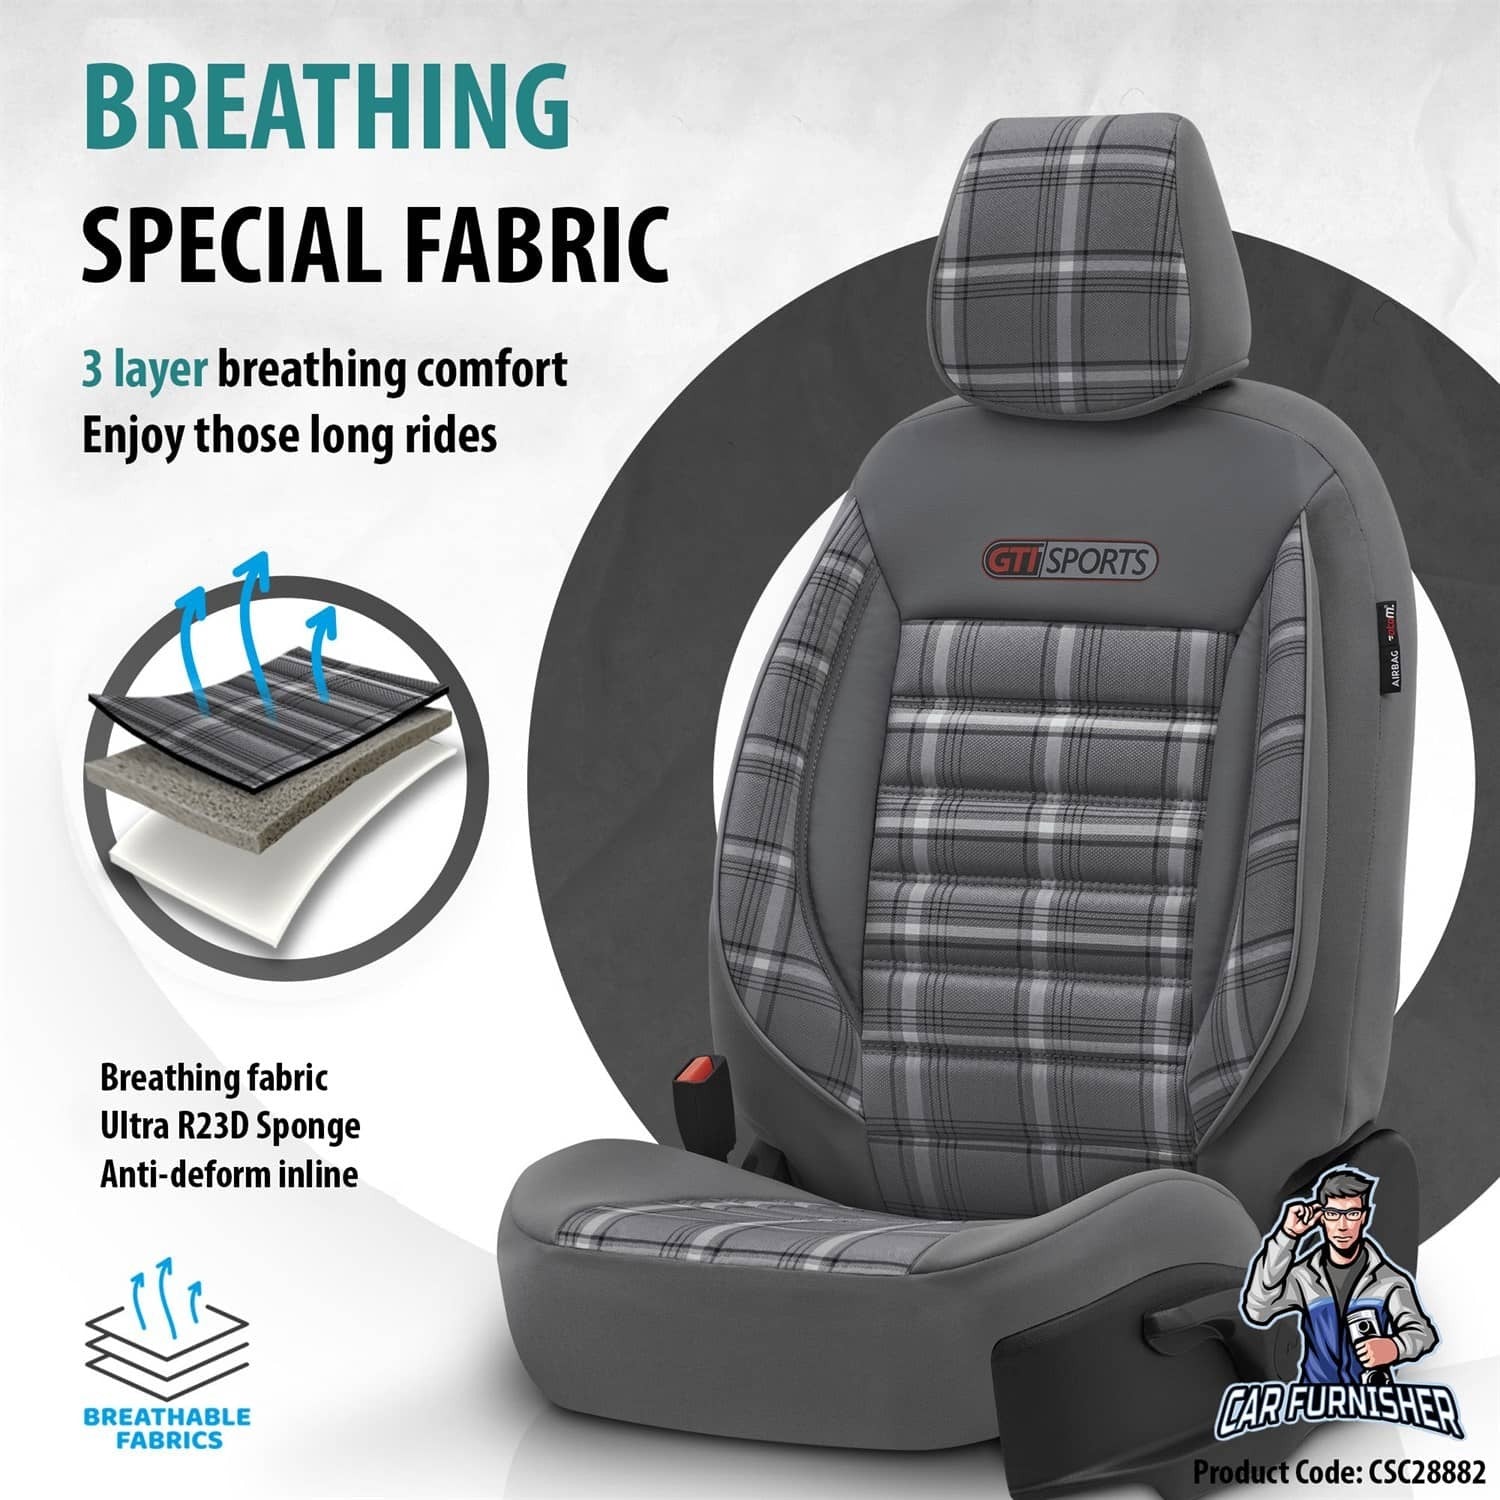 Luxury Car Seat Cover Set (8 Colors) | Sports Series Gray Leather & Fabric